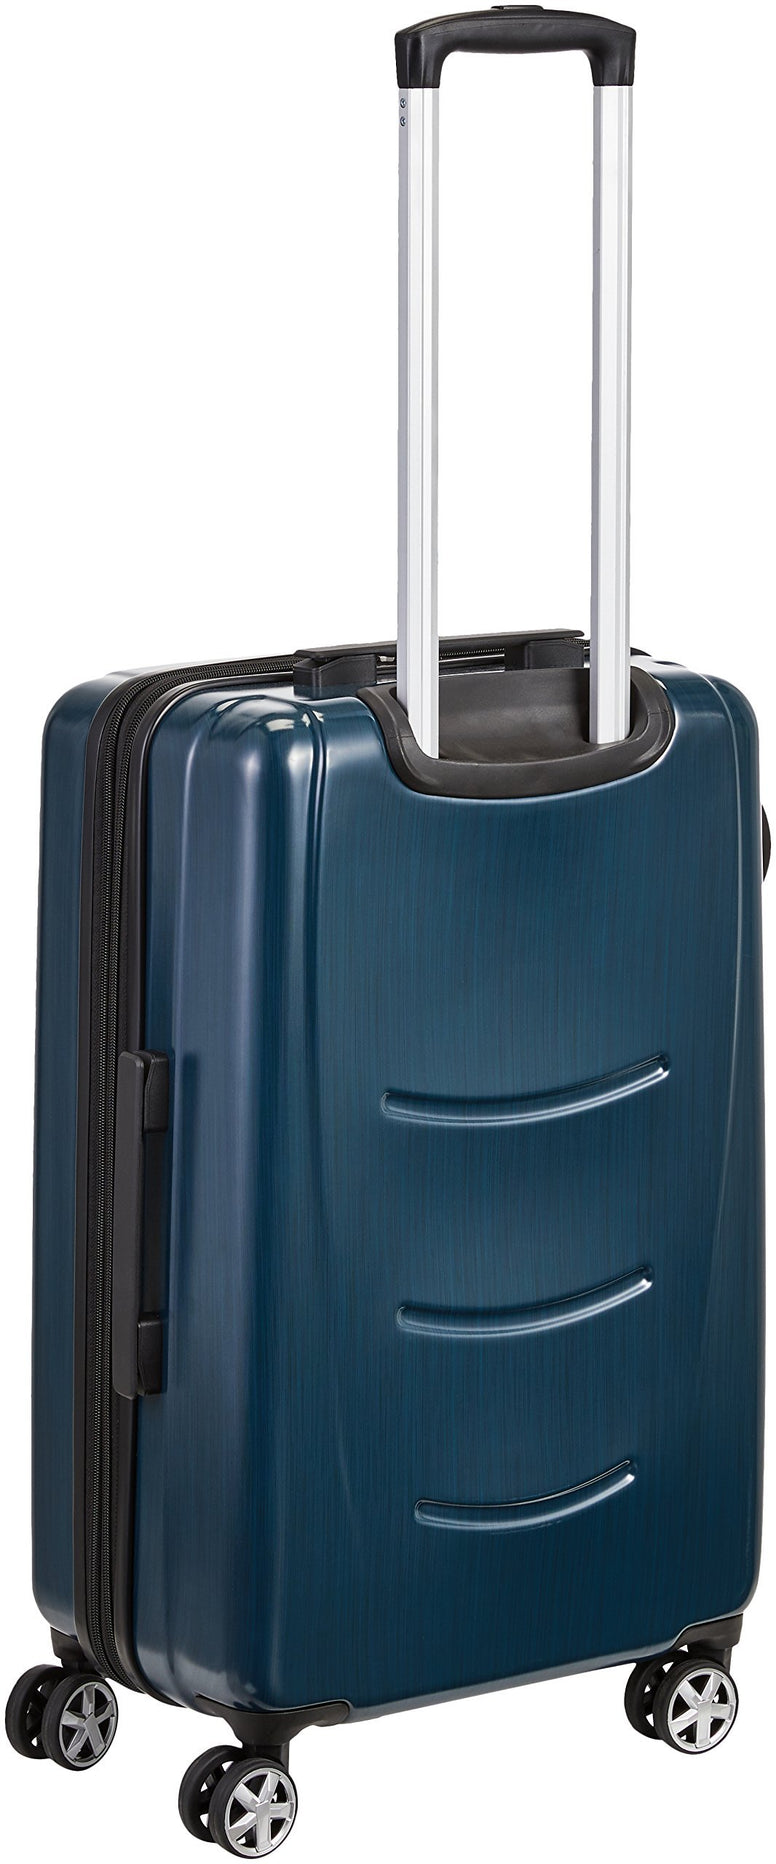 Metro Muscat Basics Hardshell Spinner Luggage - 24 inch (Material: ABS+ Polycarbonate), Navy Blue